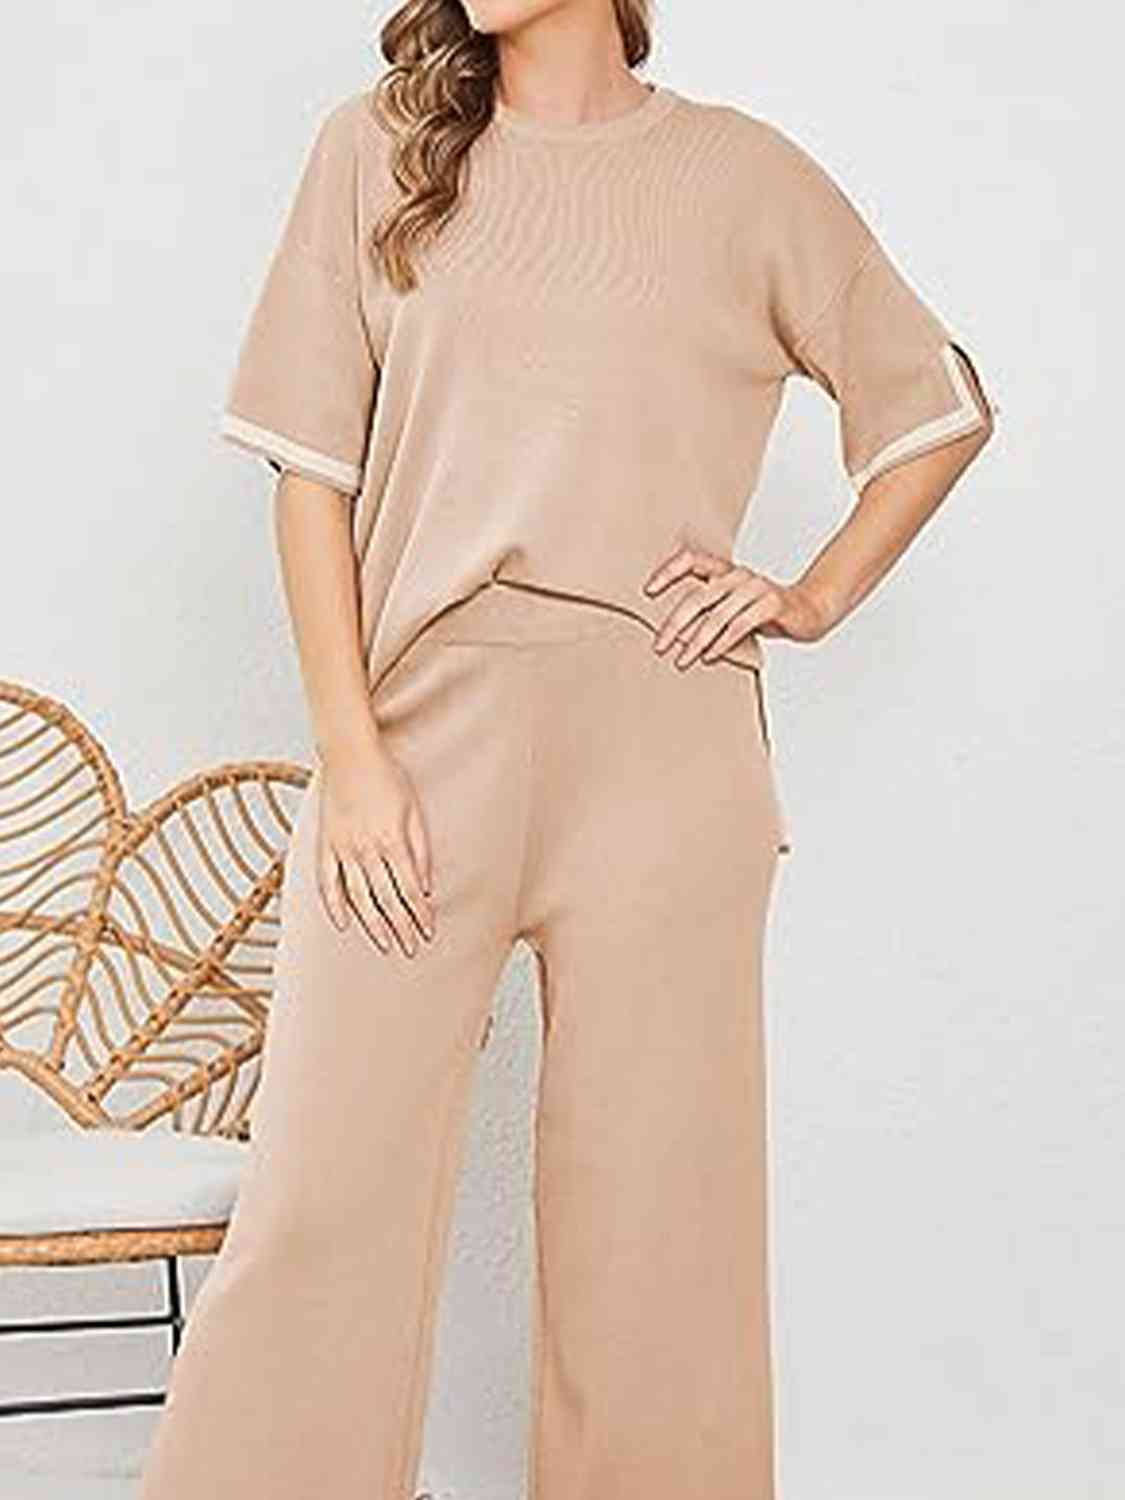 Women's Contrast High-Low Sweater and Knit Pants Set